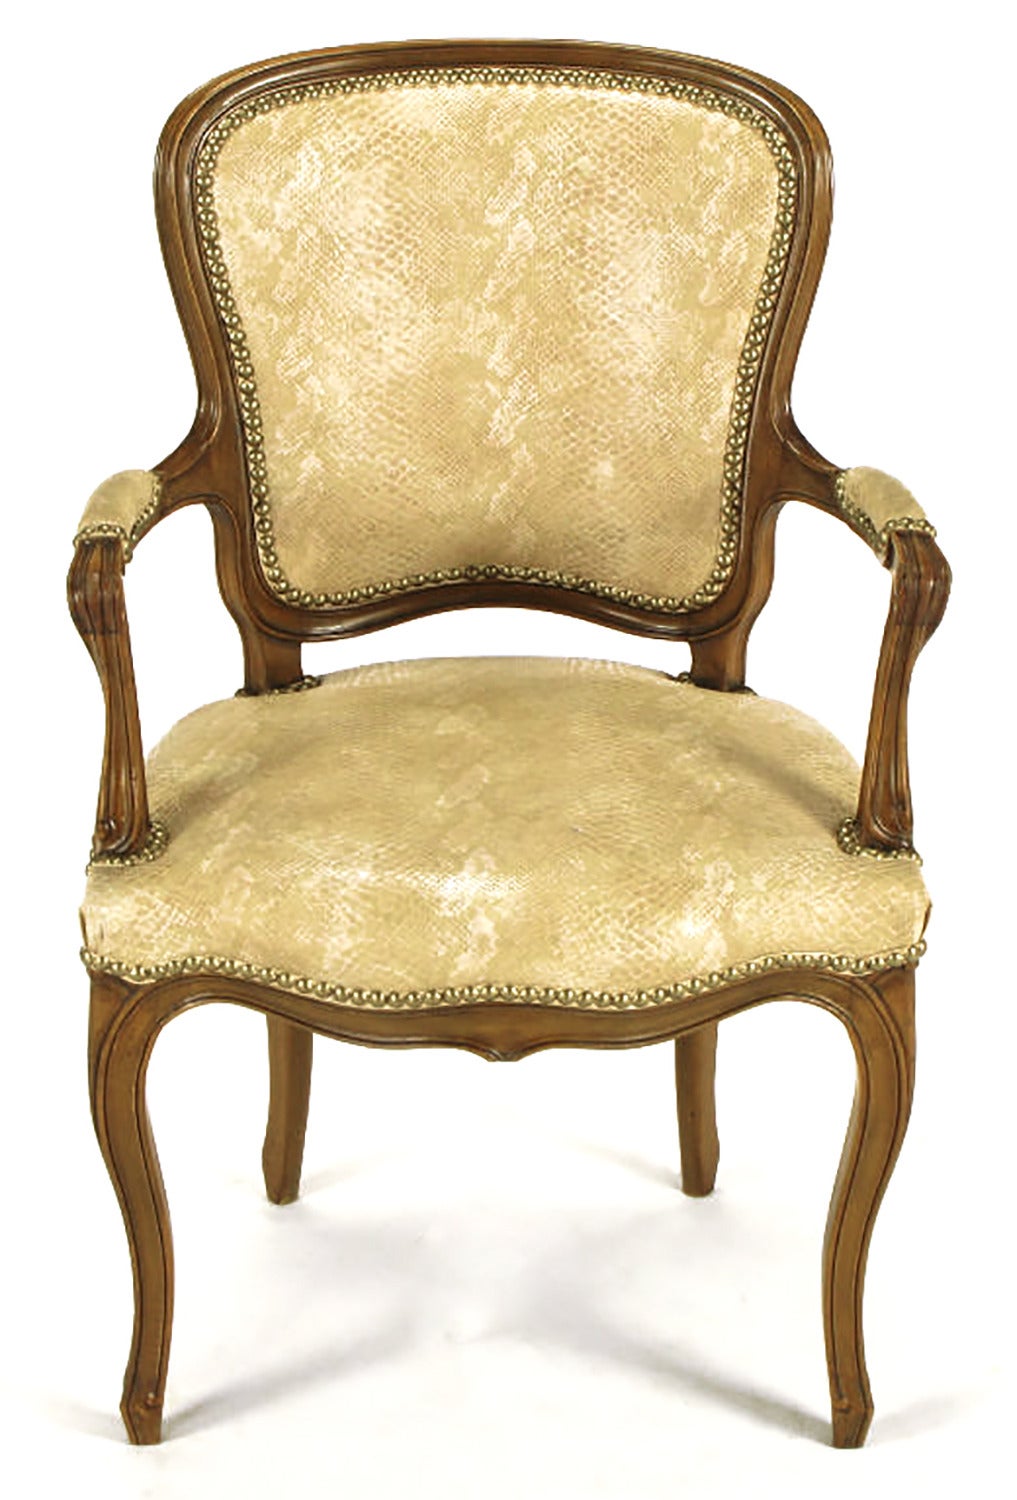 Pair of heavily carved Louis XV style armchairs on walnut frames with ivory and taupe simulated snakeskin upholstery with brass nail head detailing.